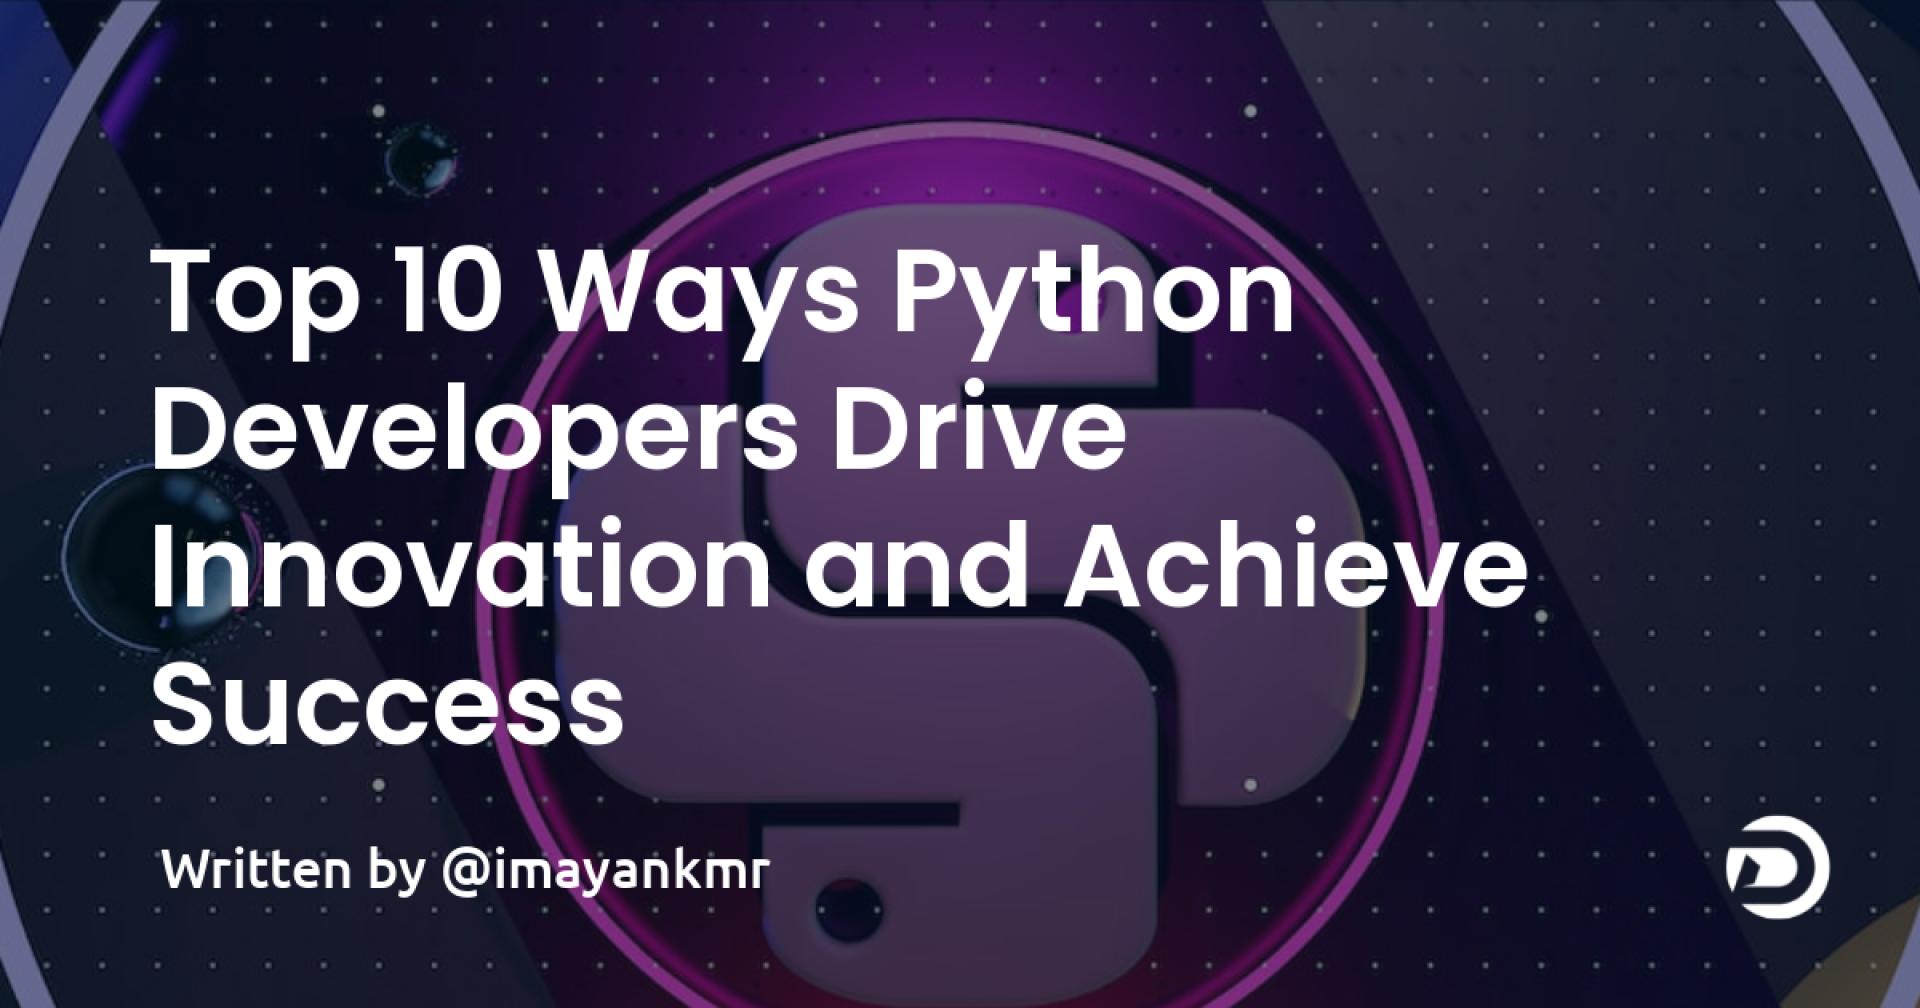 Top 10 Ways Python Developers Drive Innovation and Achieve Success 